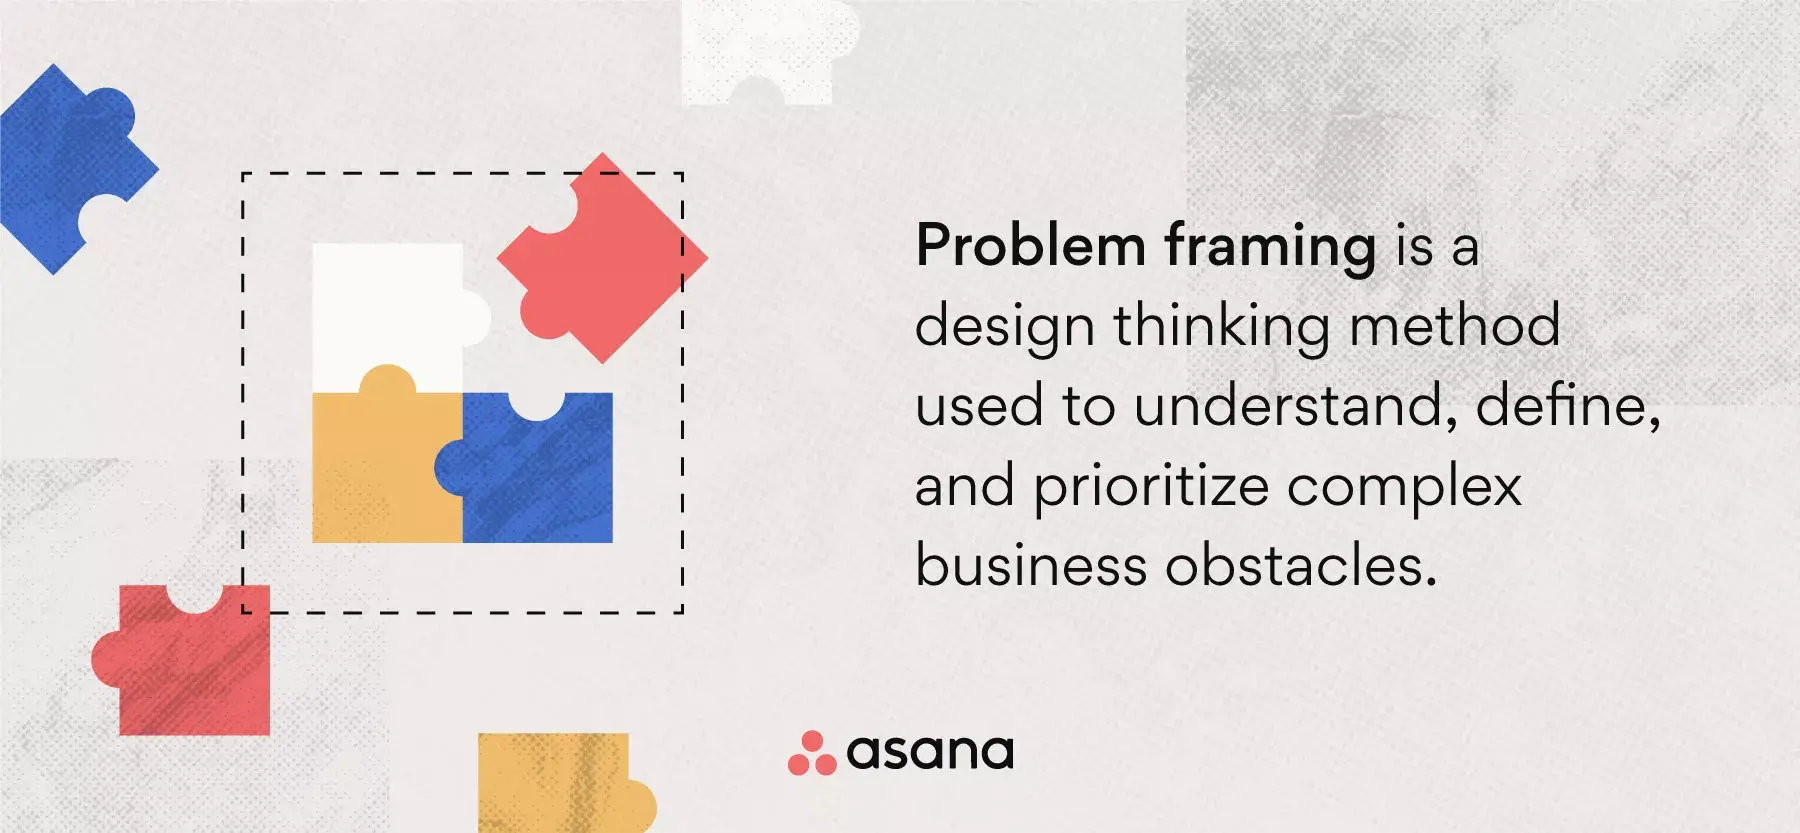 What is problem framing?